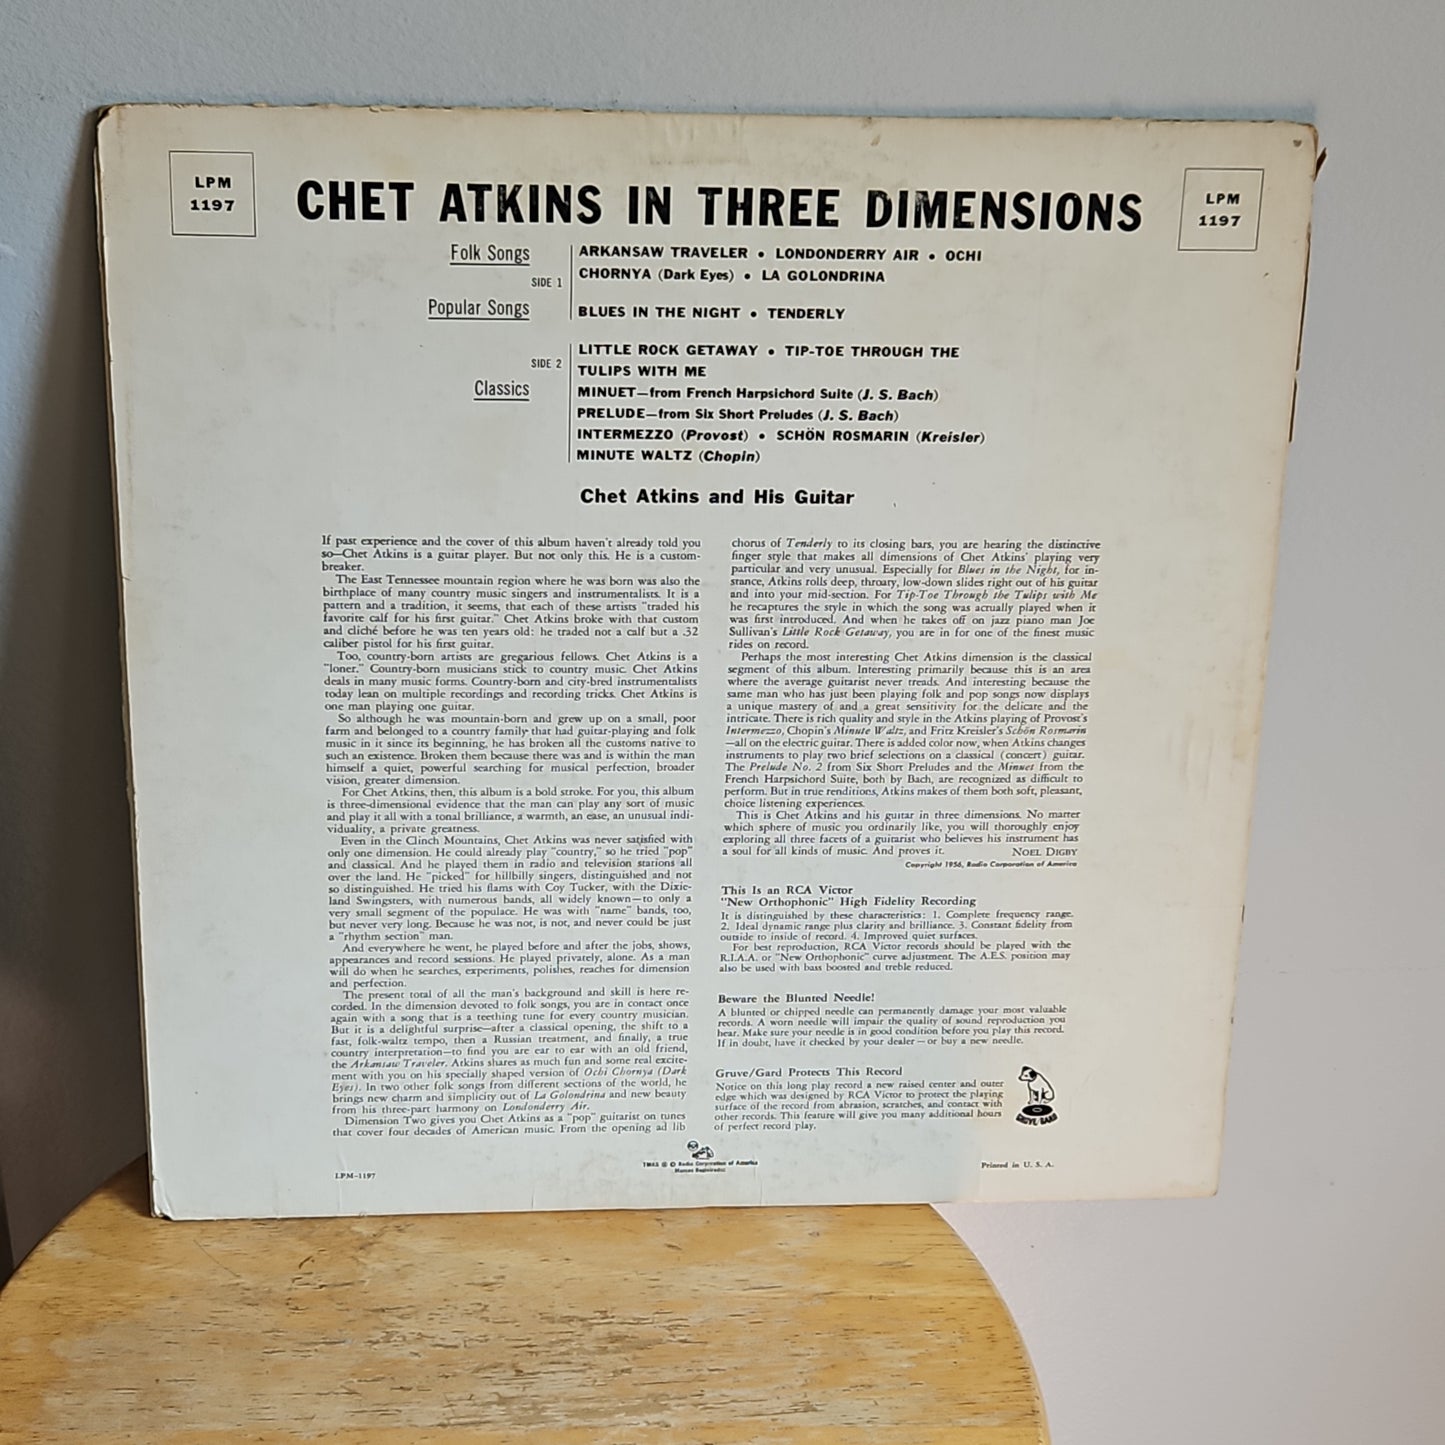 Chet Atkins in 3 Dimensions By RCA Victor Records